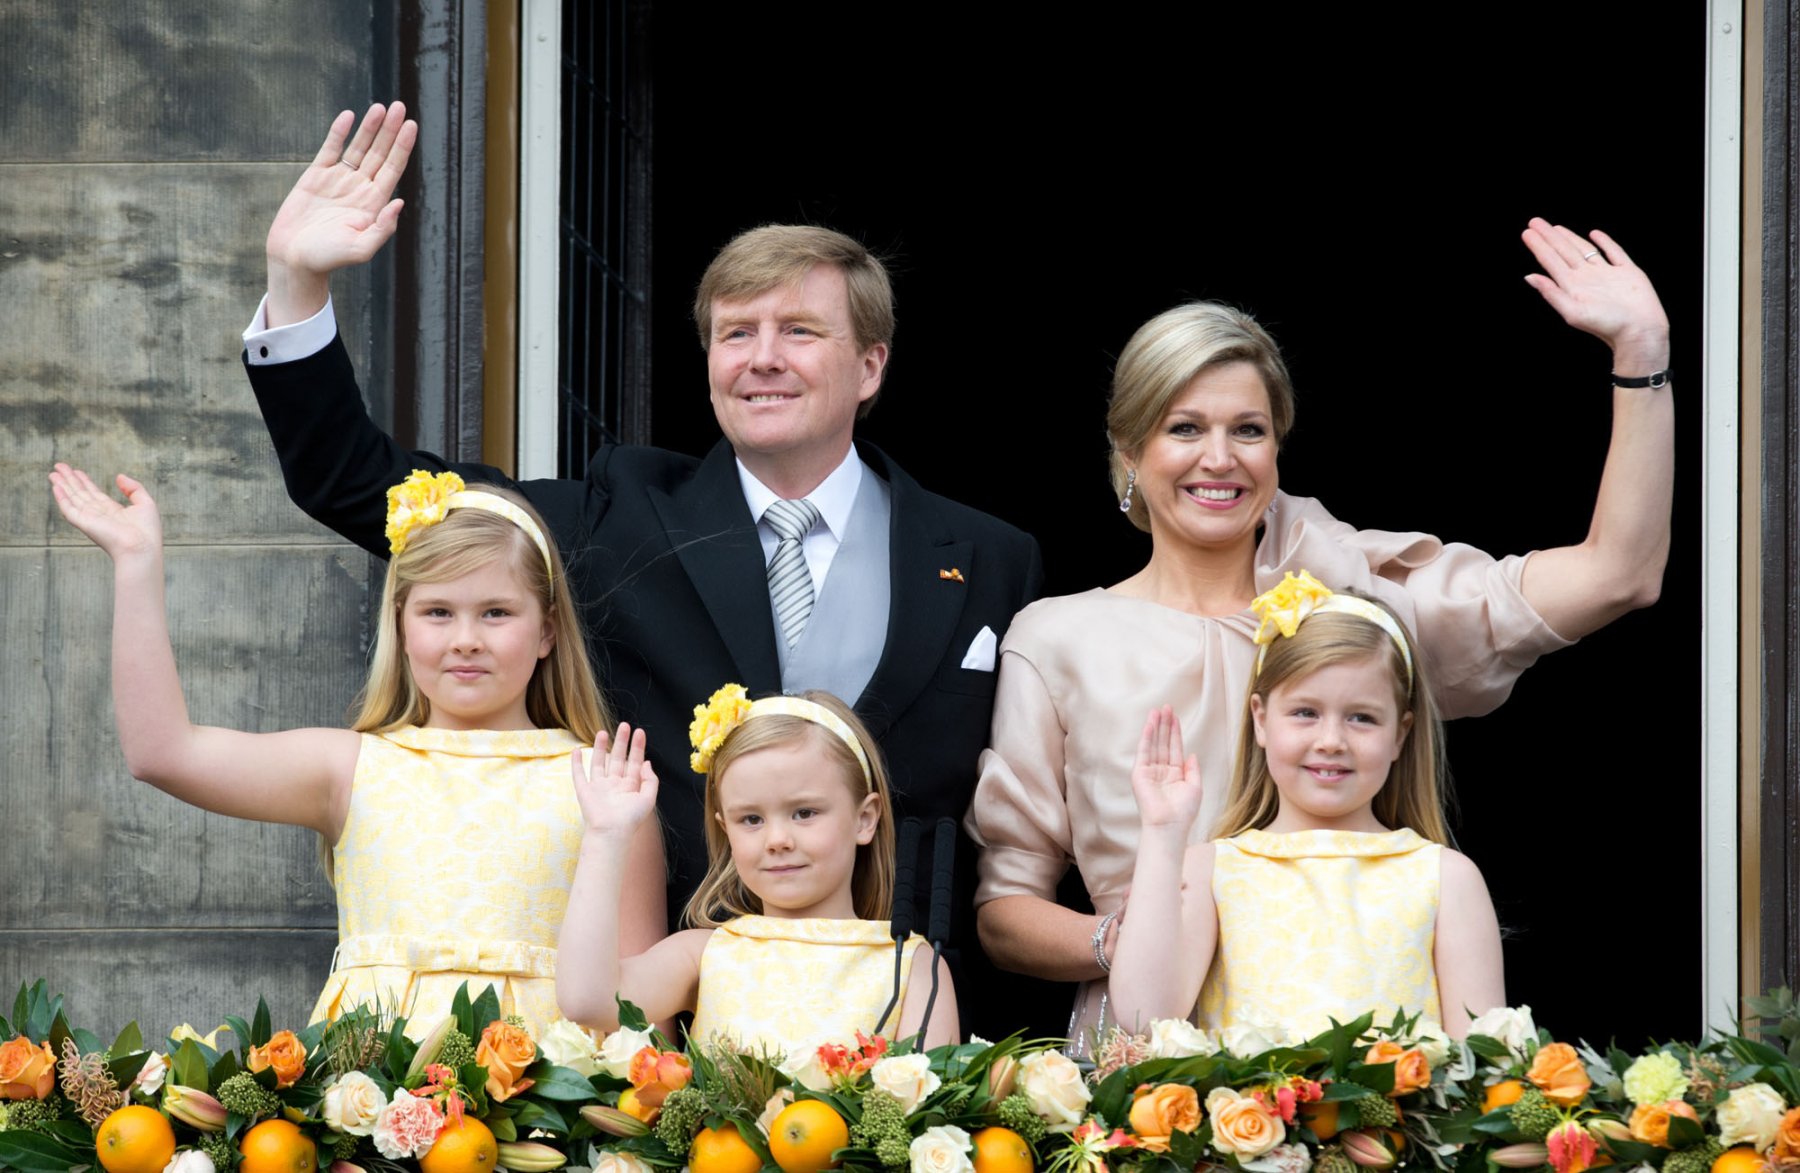 Dutch Royal family members King Willem-Alexander, Queen Maxcima are seen on the balcony  of the Royal Palace in Amsterdam, The Netherlands, 30 April 2013, following the abdiction of her Majesty the Queen. Photo: Boris Roessler/dpa